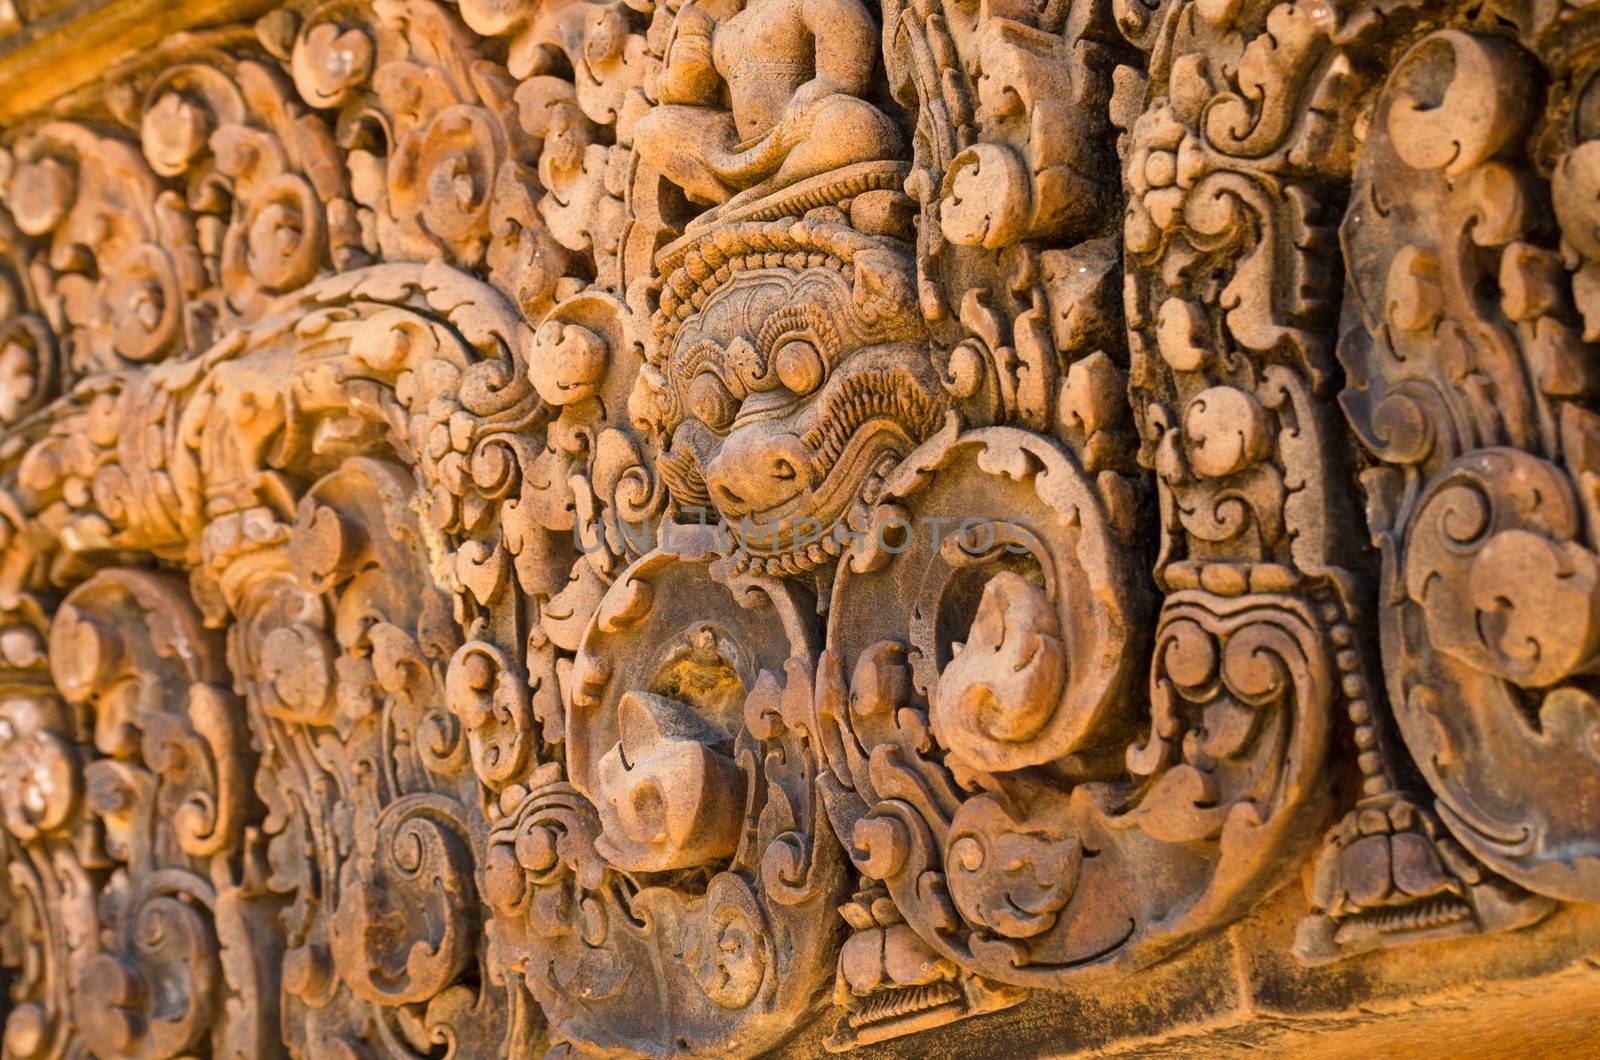 Carving details at Banteay Srei temple by siraanamwong